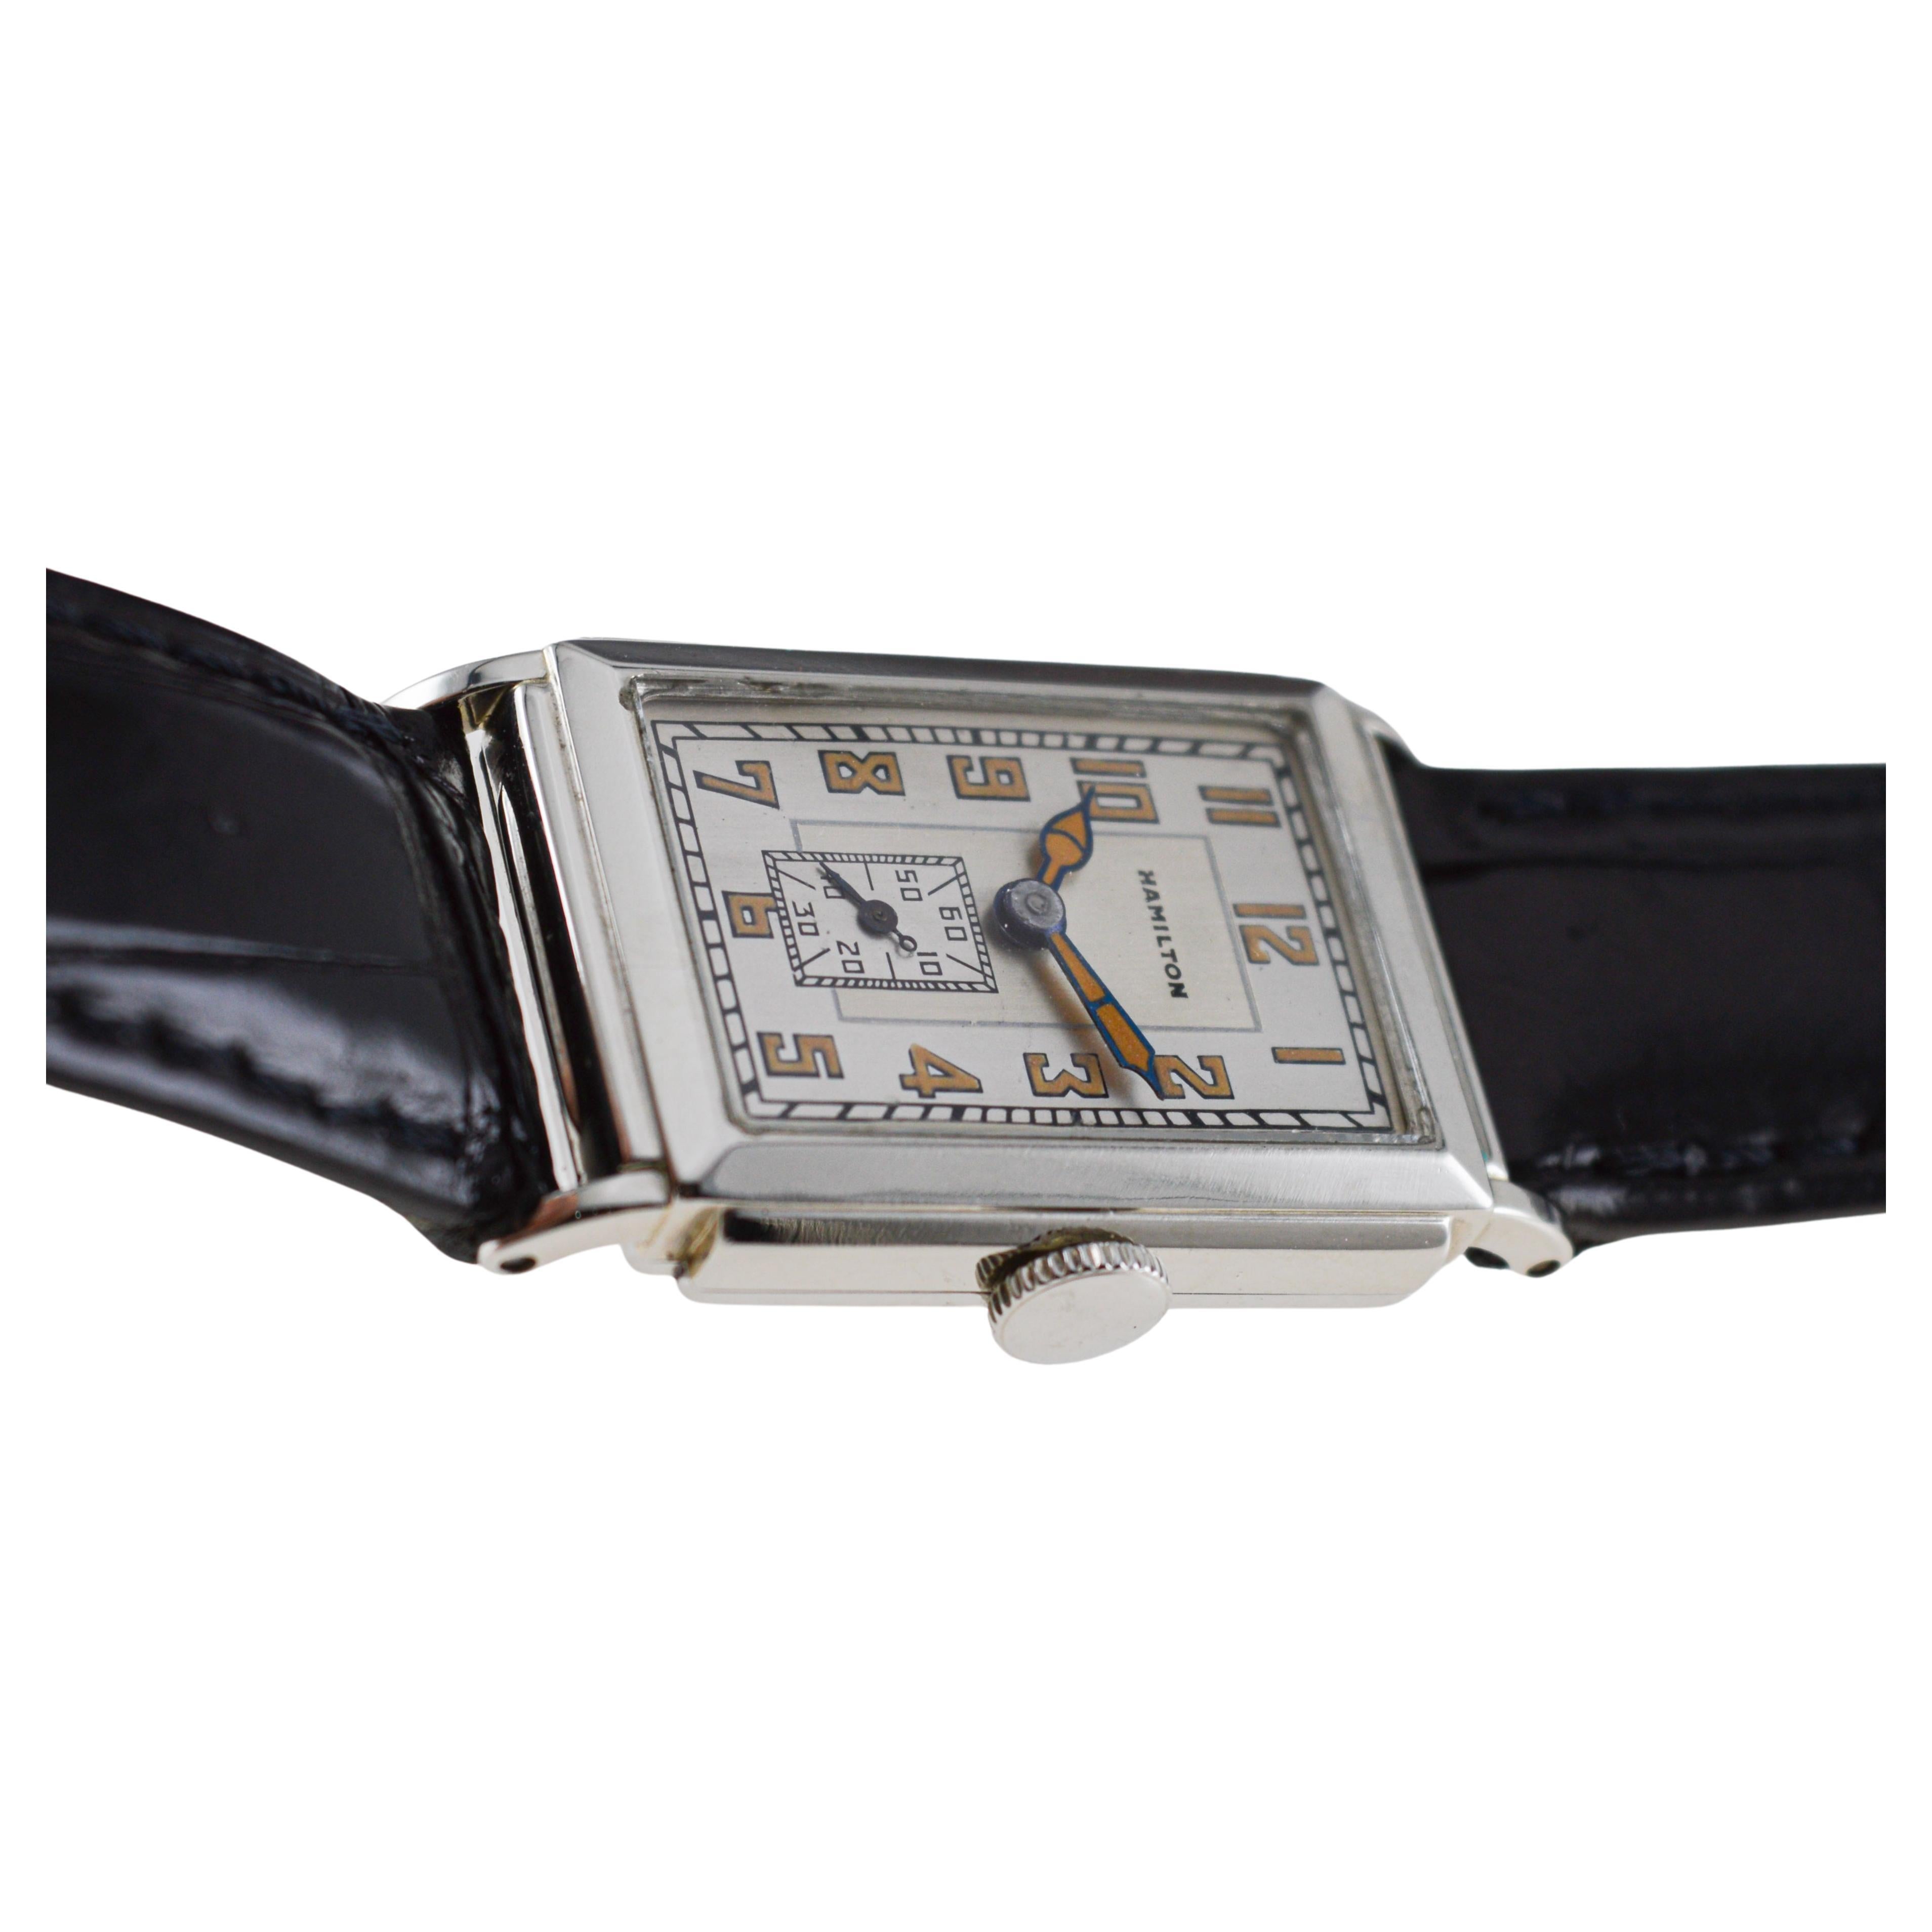 Hamilton 14K Solid White Gold Art Deco Watch with Presentation Back from 1932 For Sale 9